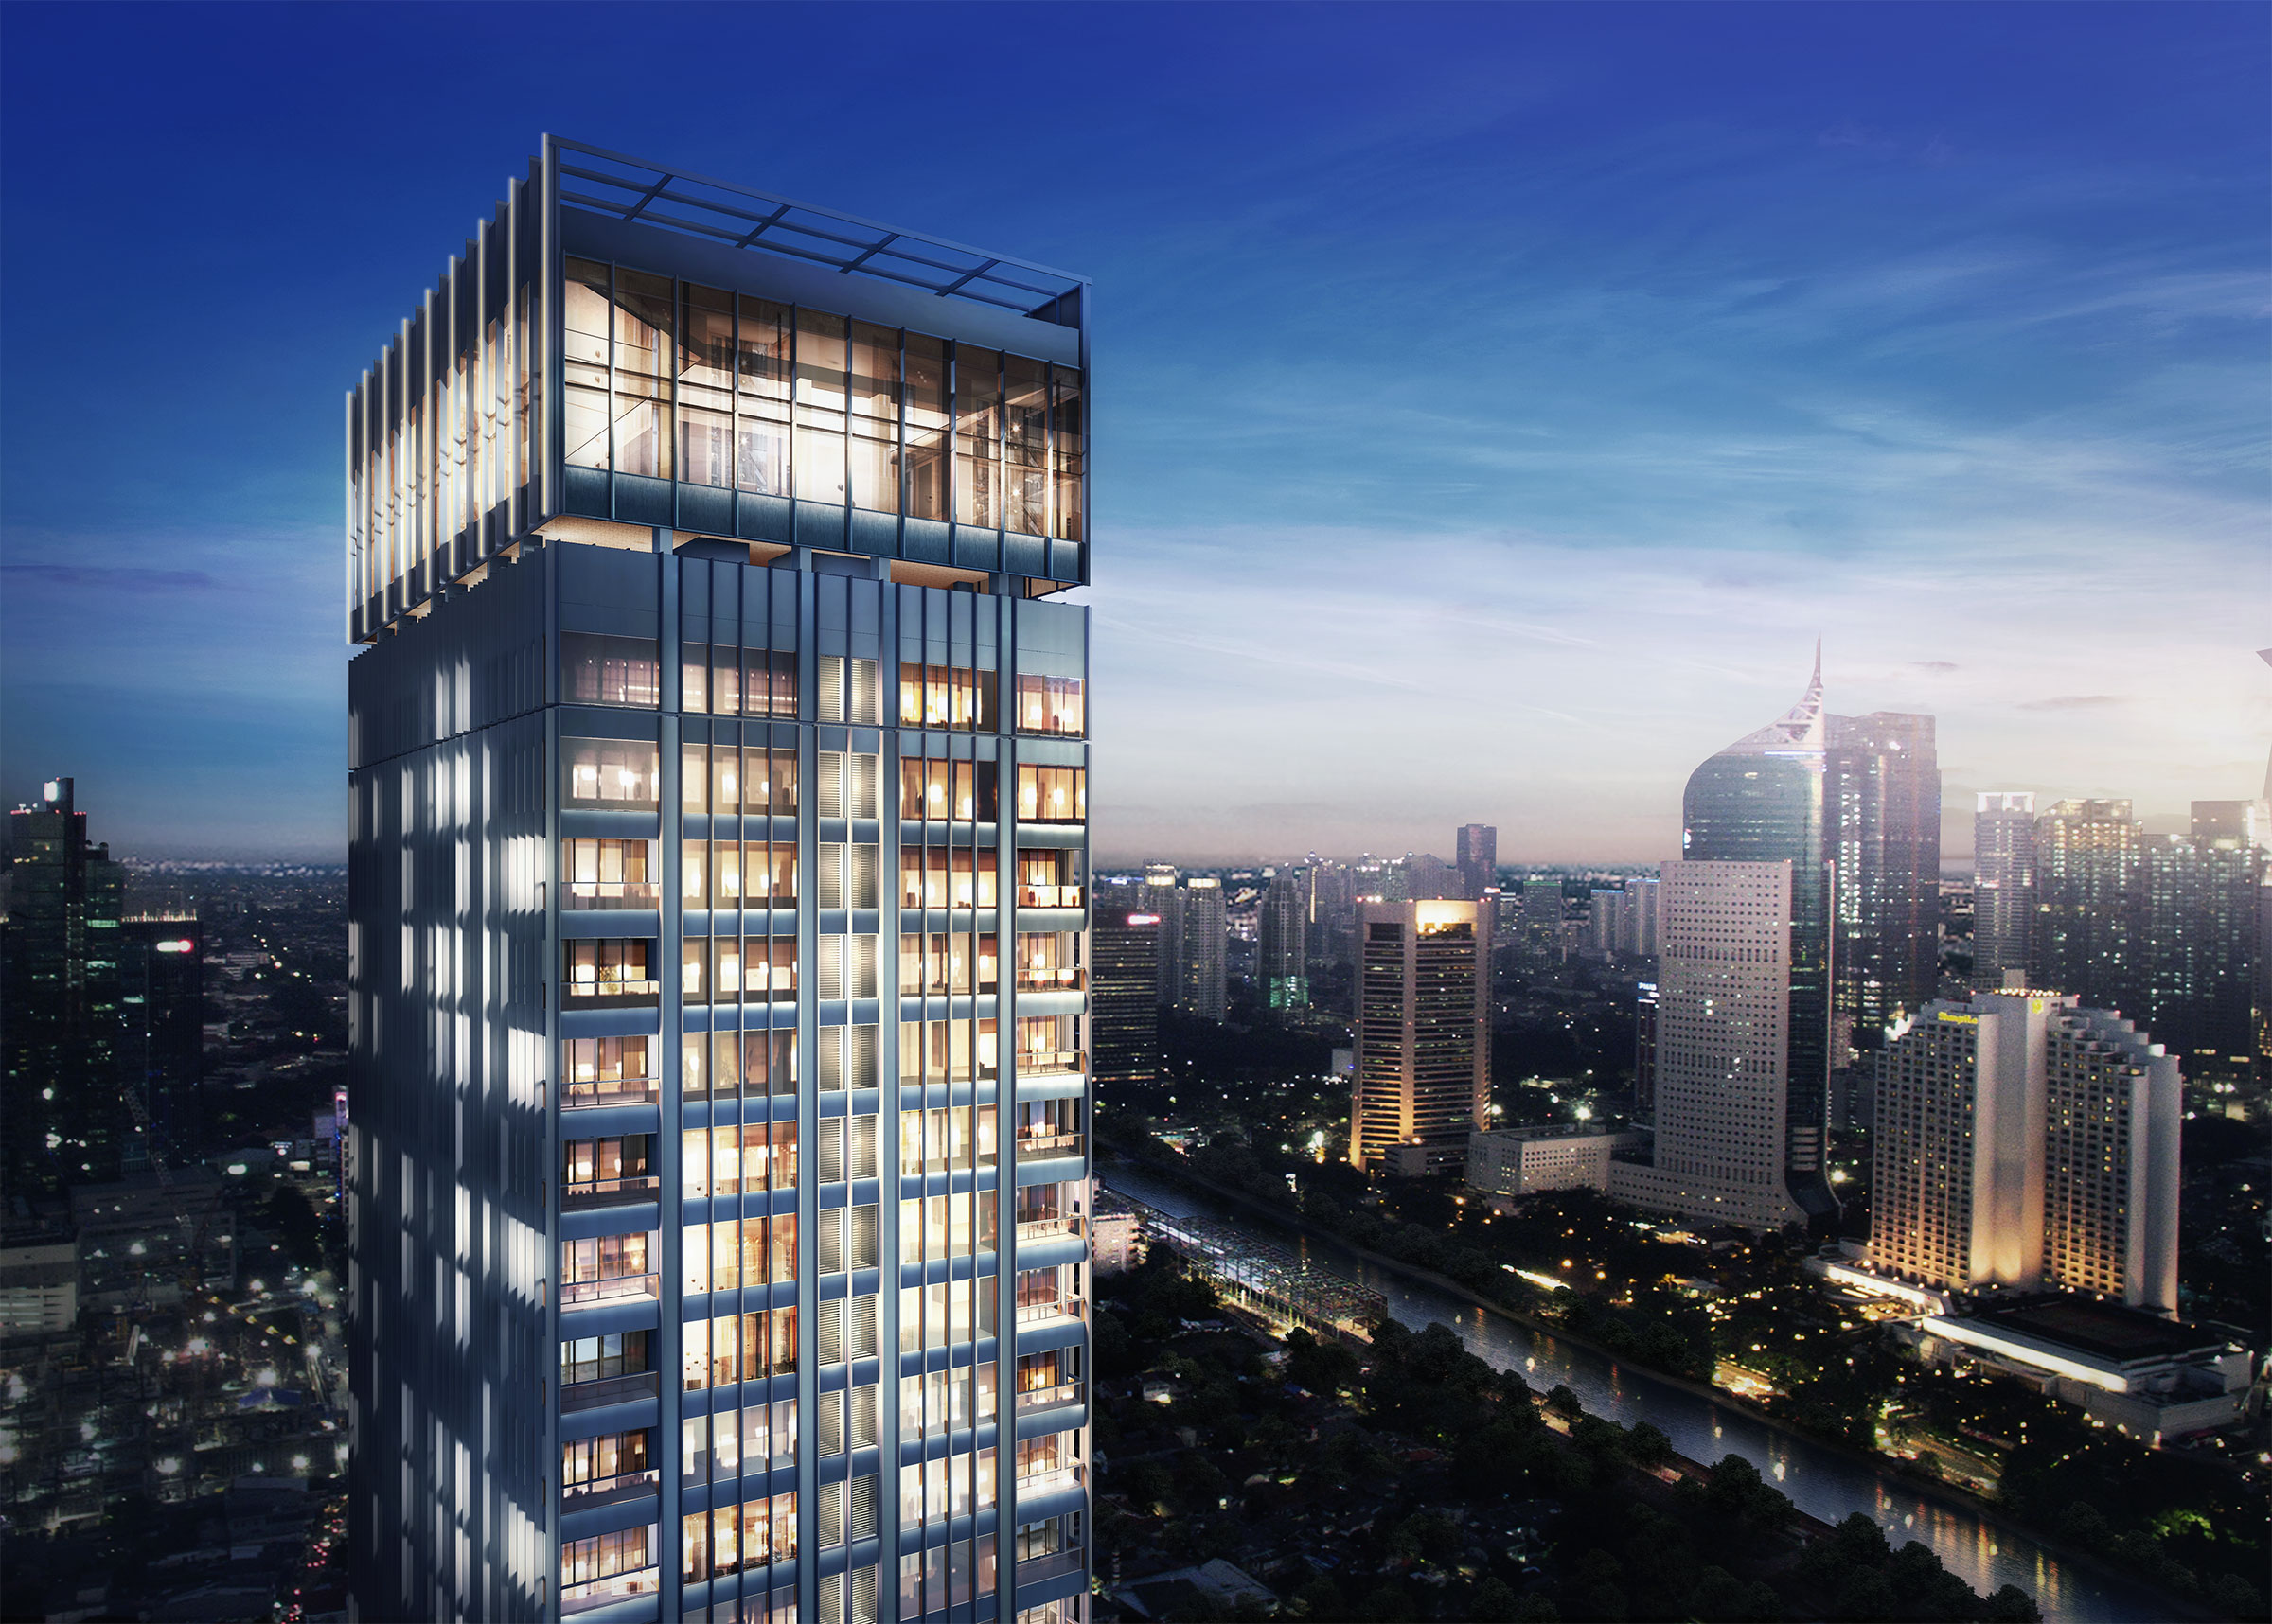 Above it all, panoramic views of the city. - 57 PROMENADE Residences jaksel